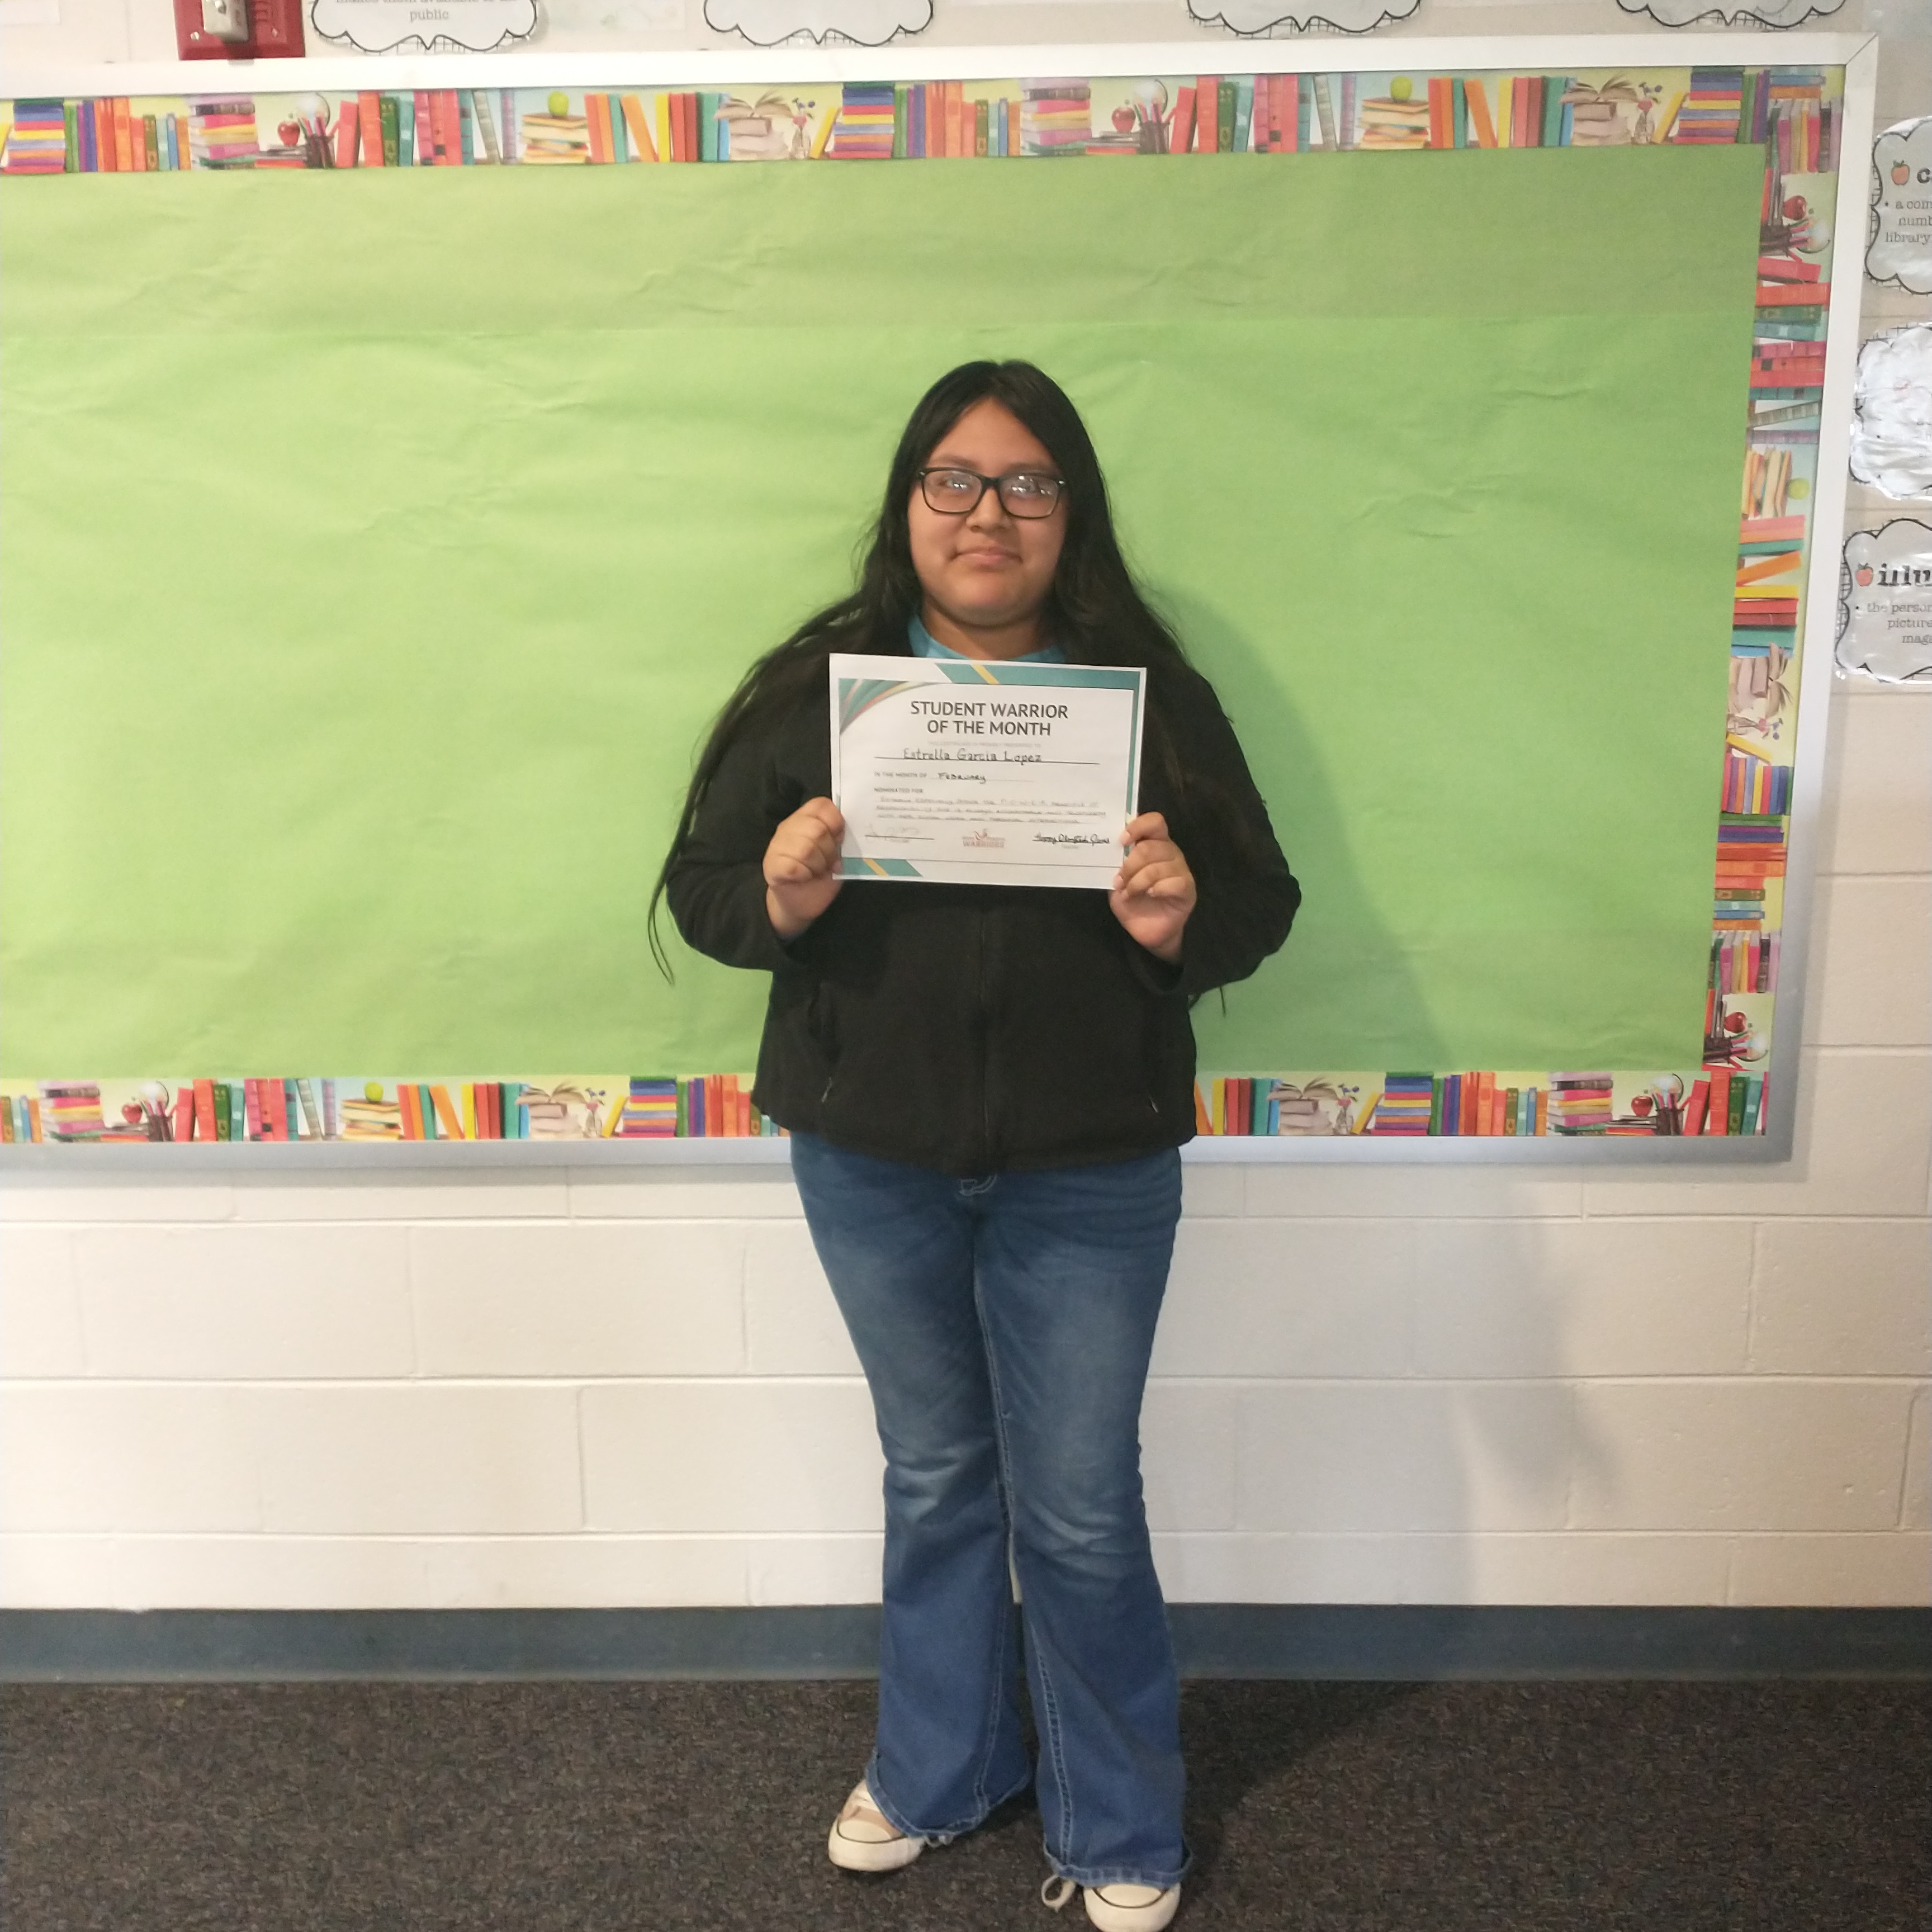 8th grade February student Warrior of the Month